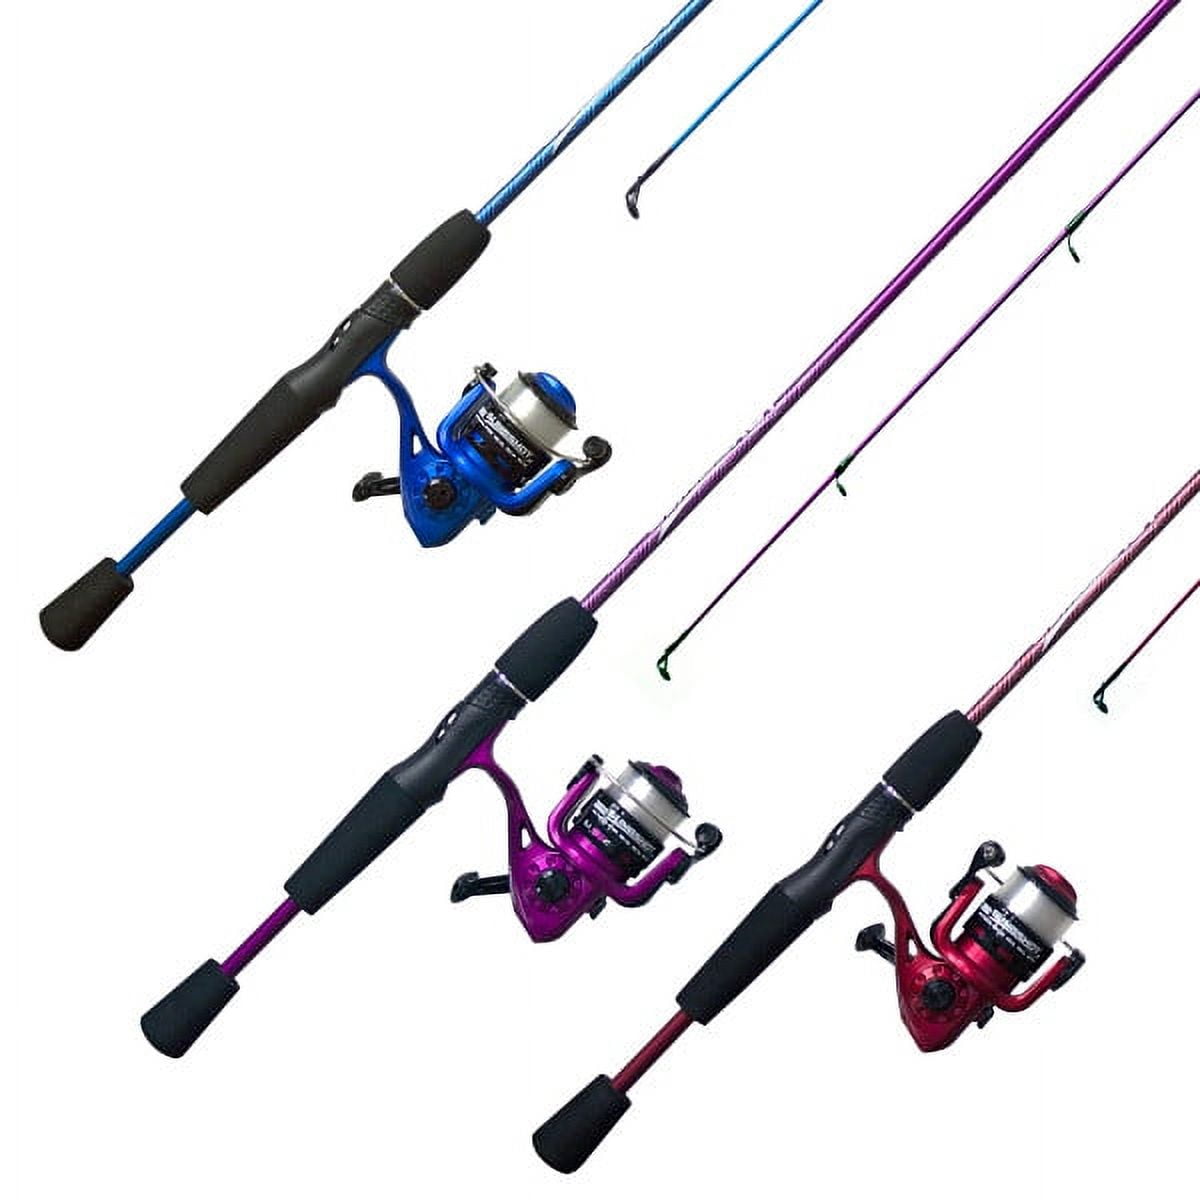 Zebco Slingshot Spinning Fishing Rod and Reel Combo